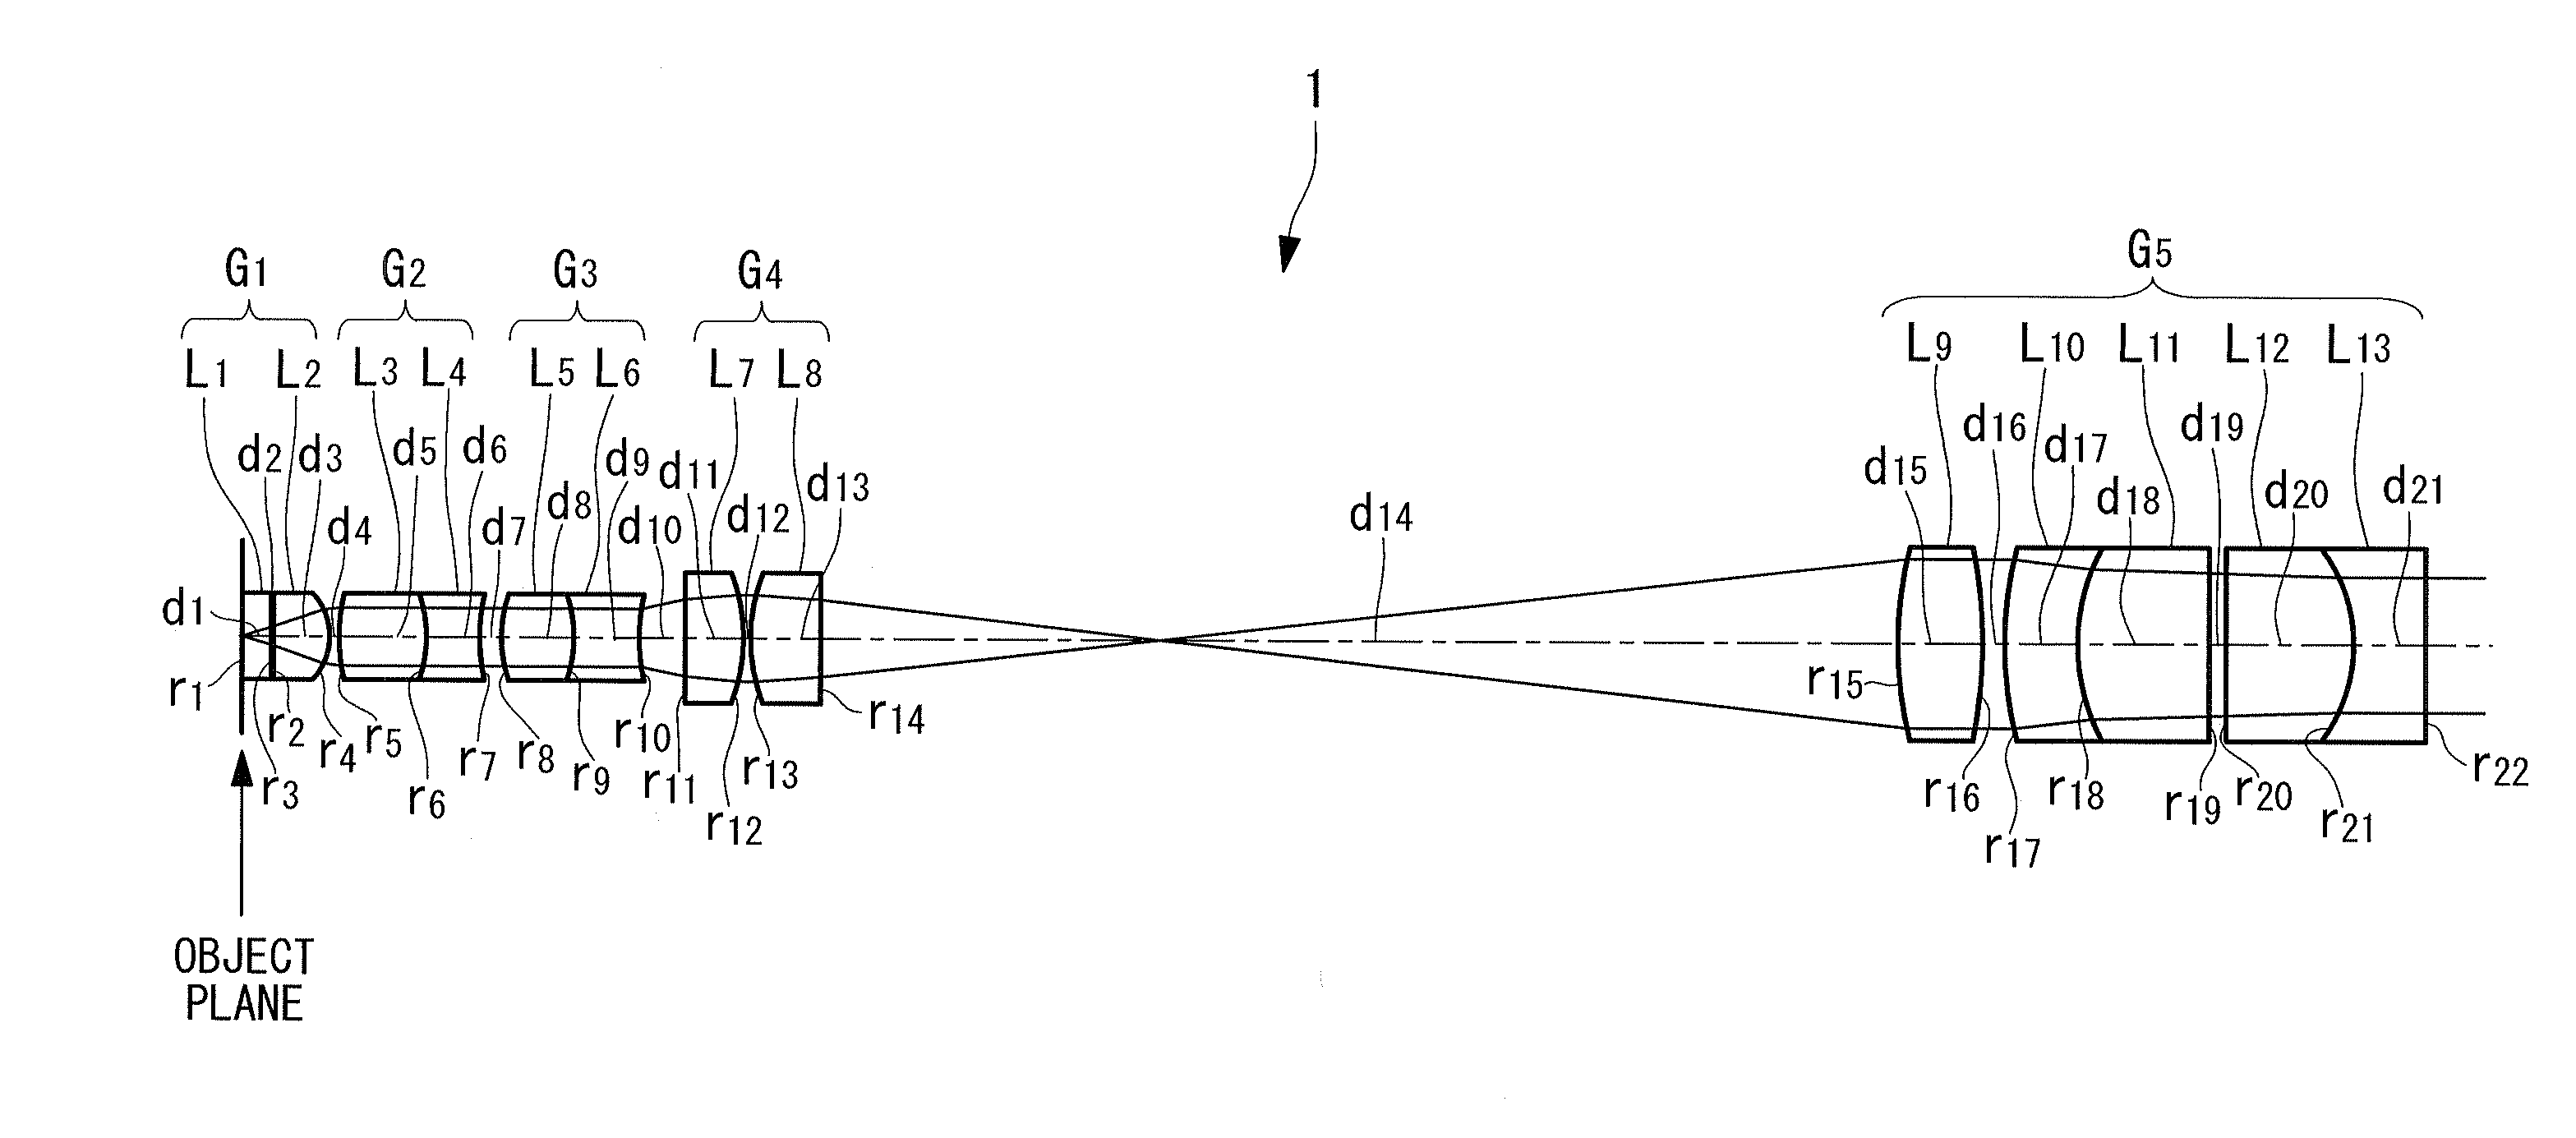 Objective optical system